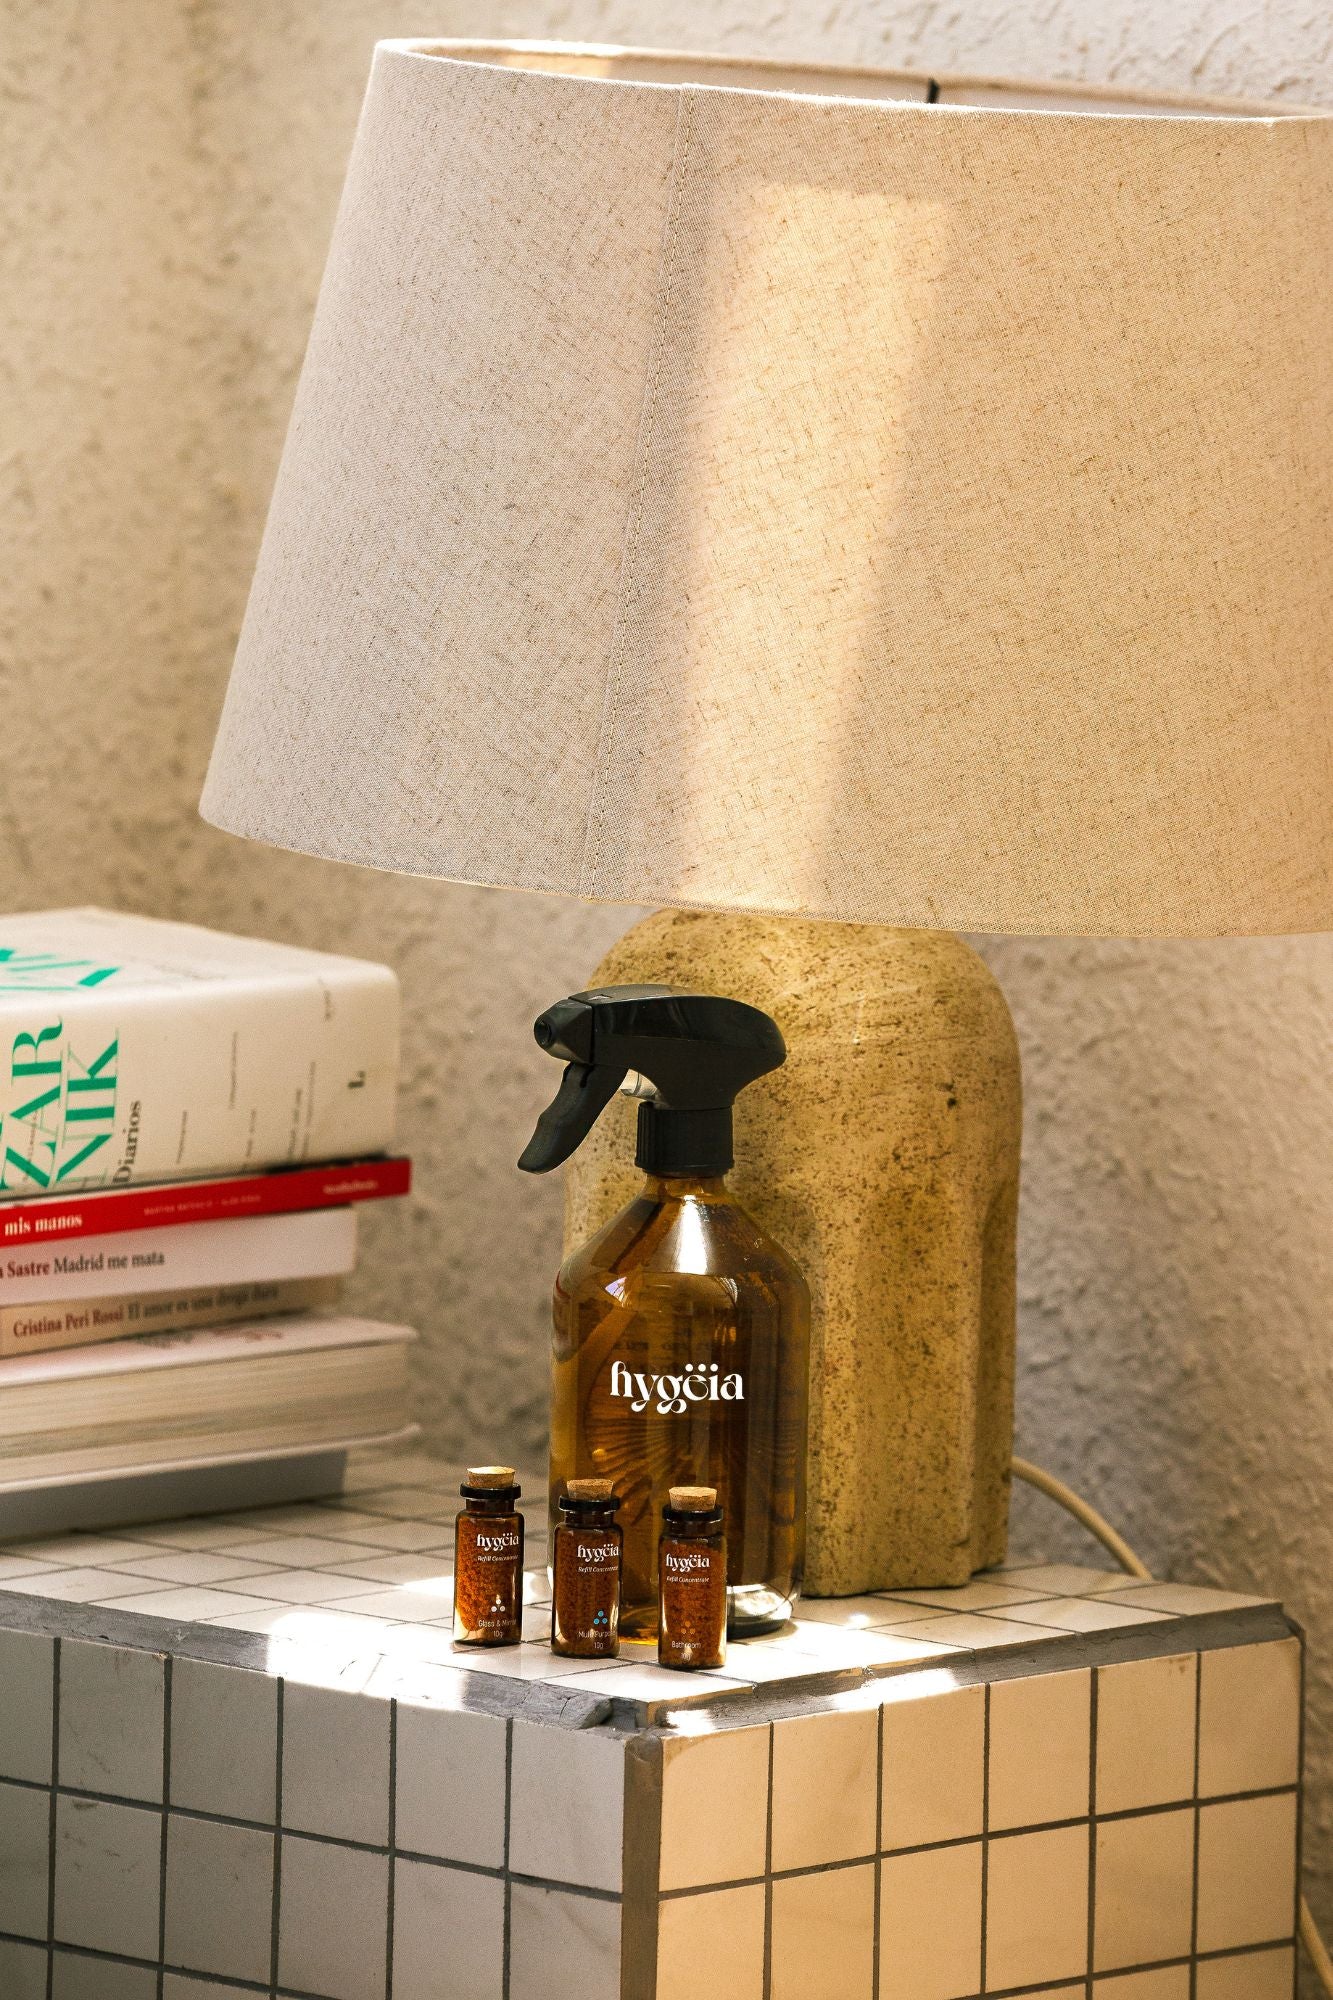 eco friendly cleaning products next to a lampshade in home environment 